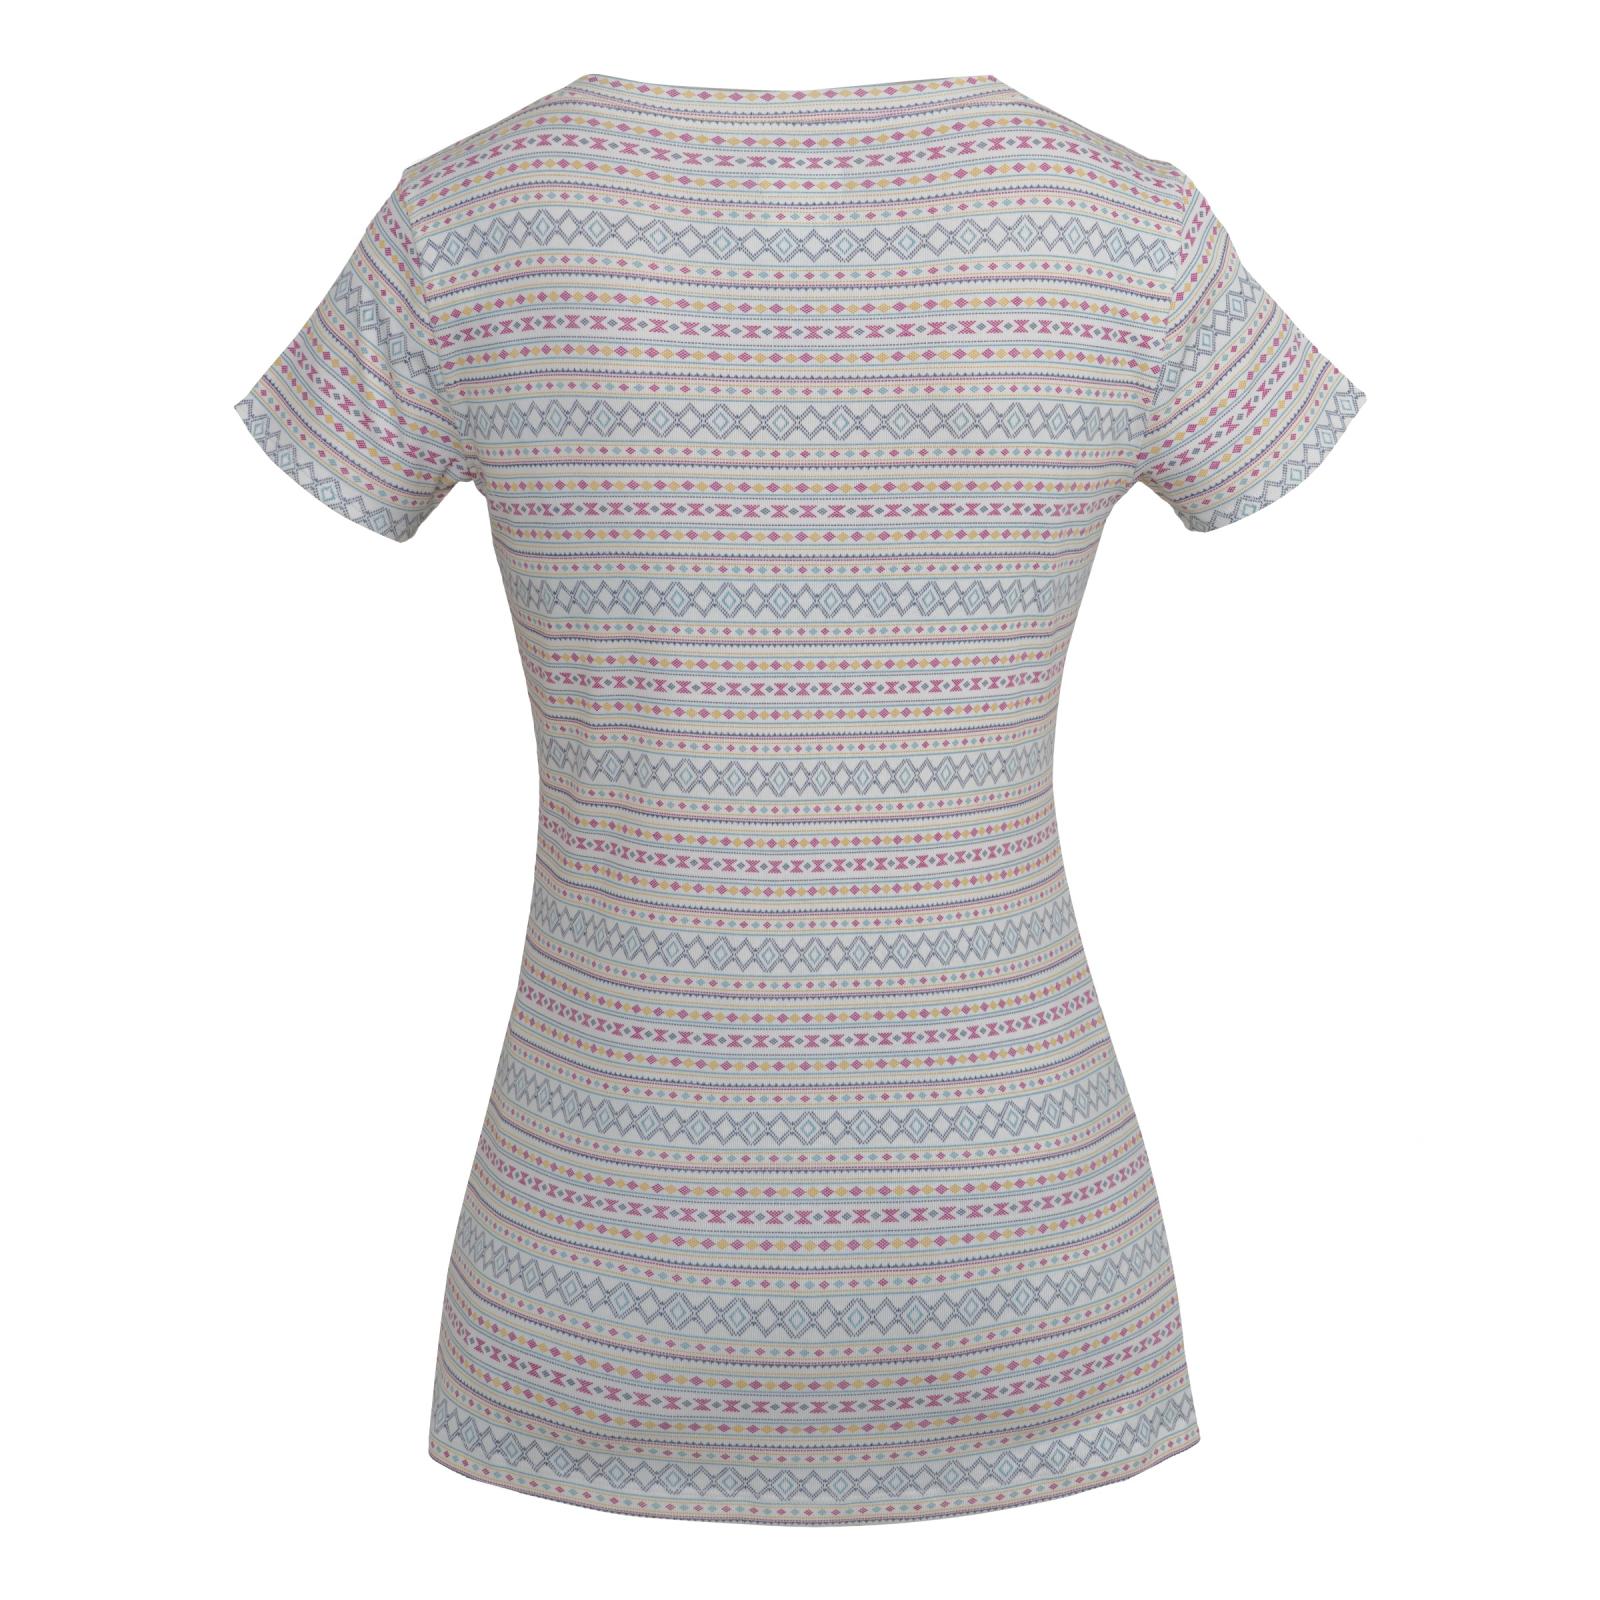 Noble Outfitters Women's Tug-Free™ Tee